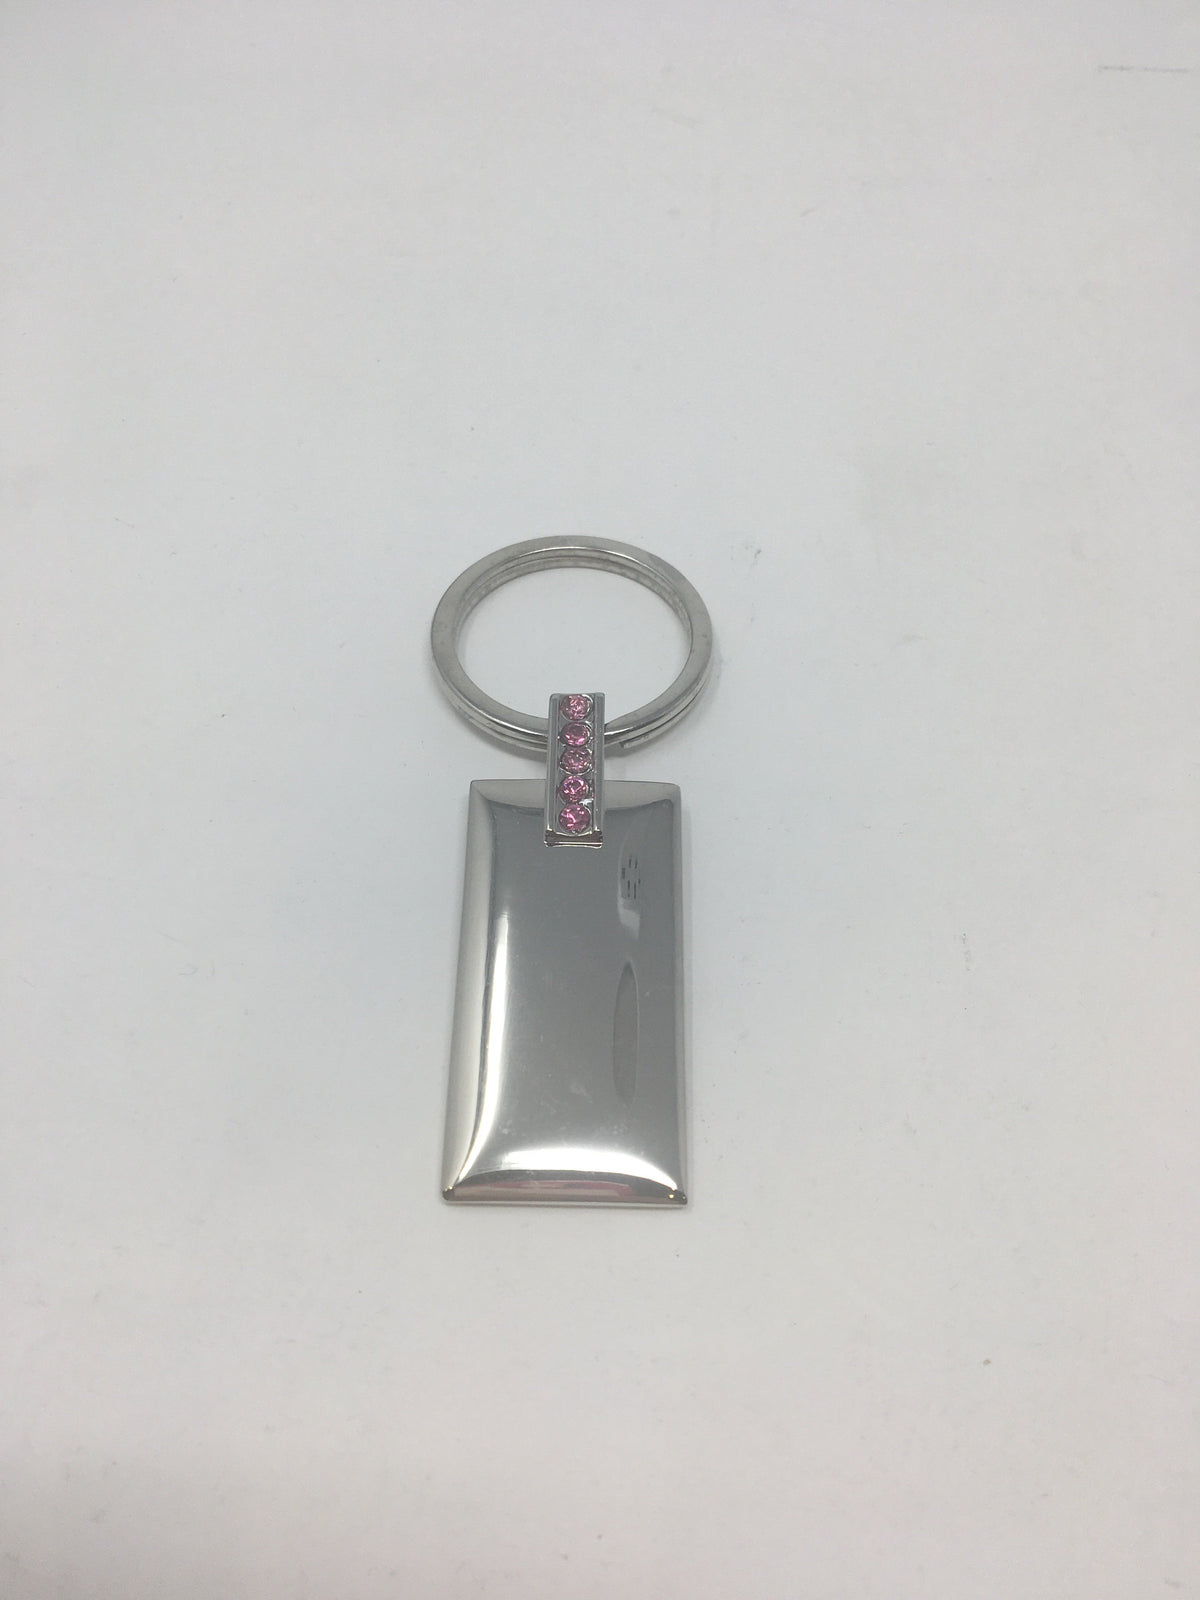 Silver Key Chain with Crystals